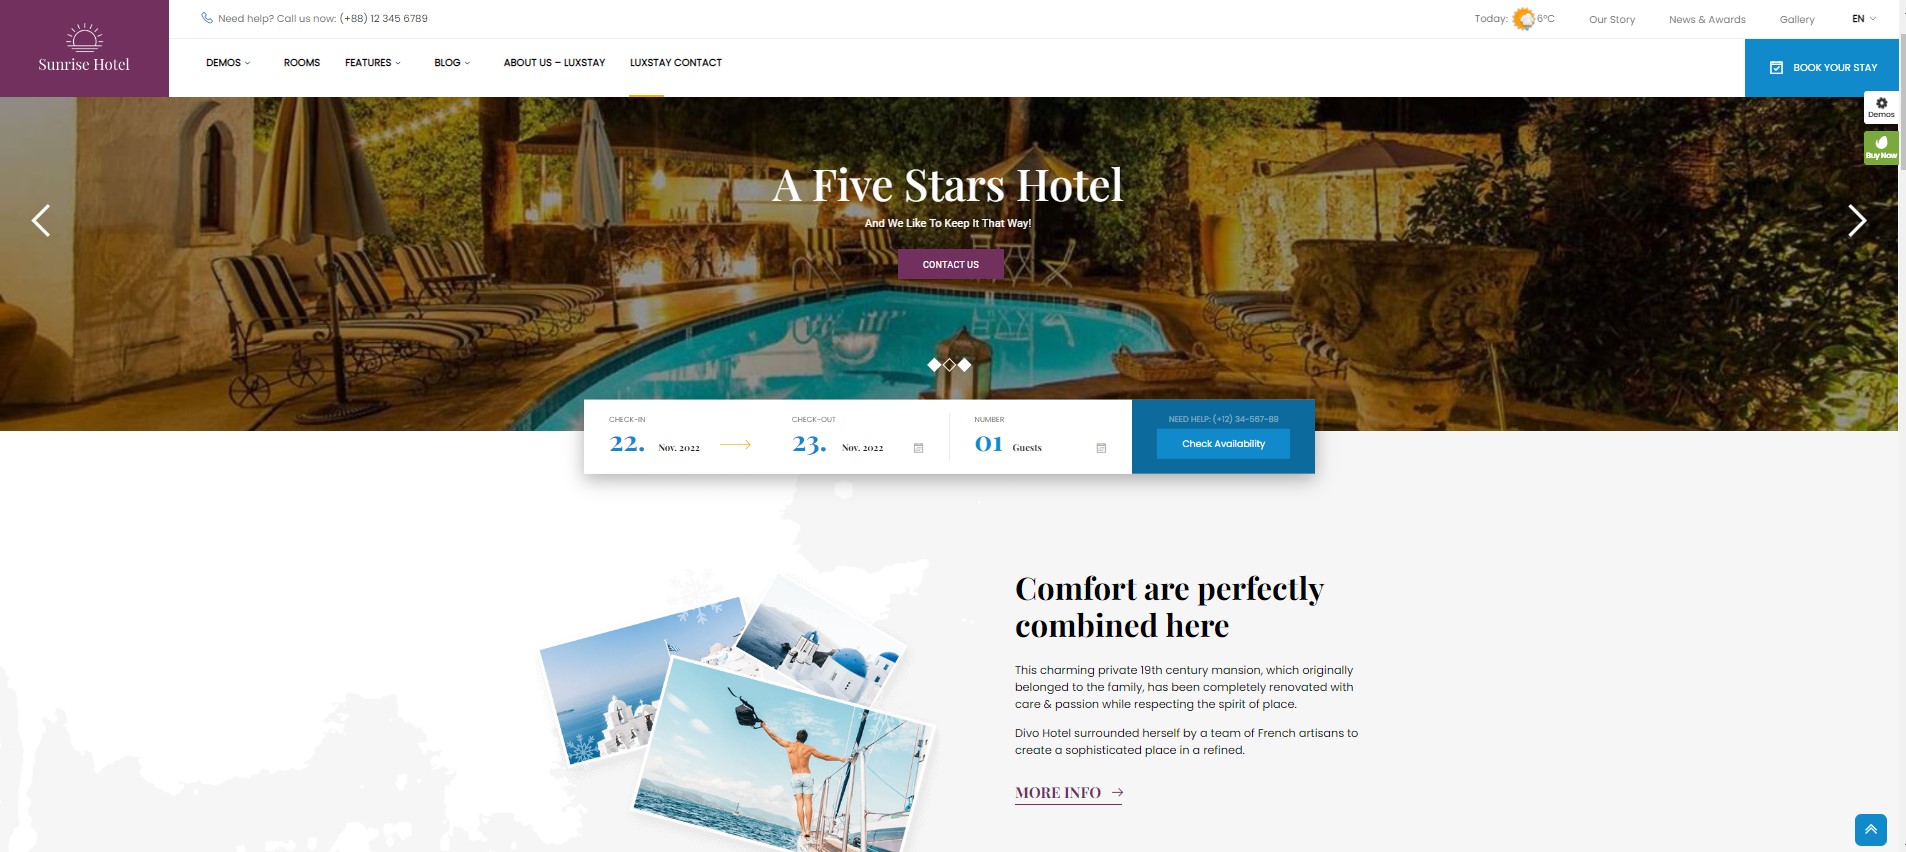 luxstay - the hotel wordpress theme with a stunning appearance 